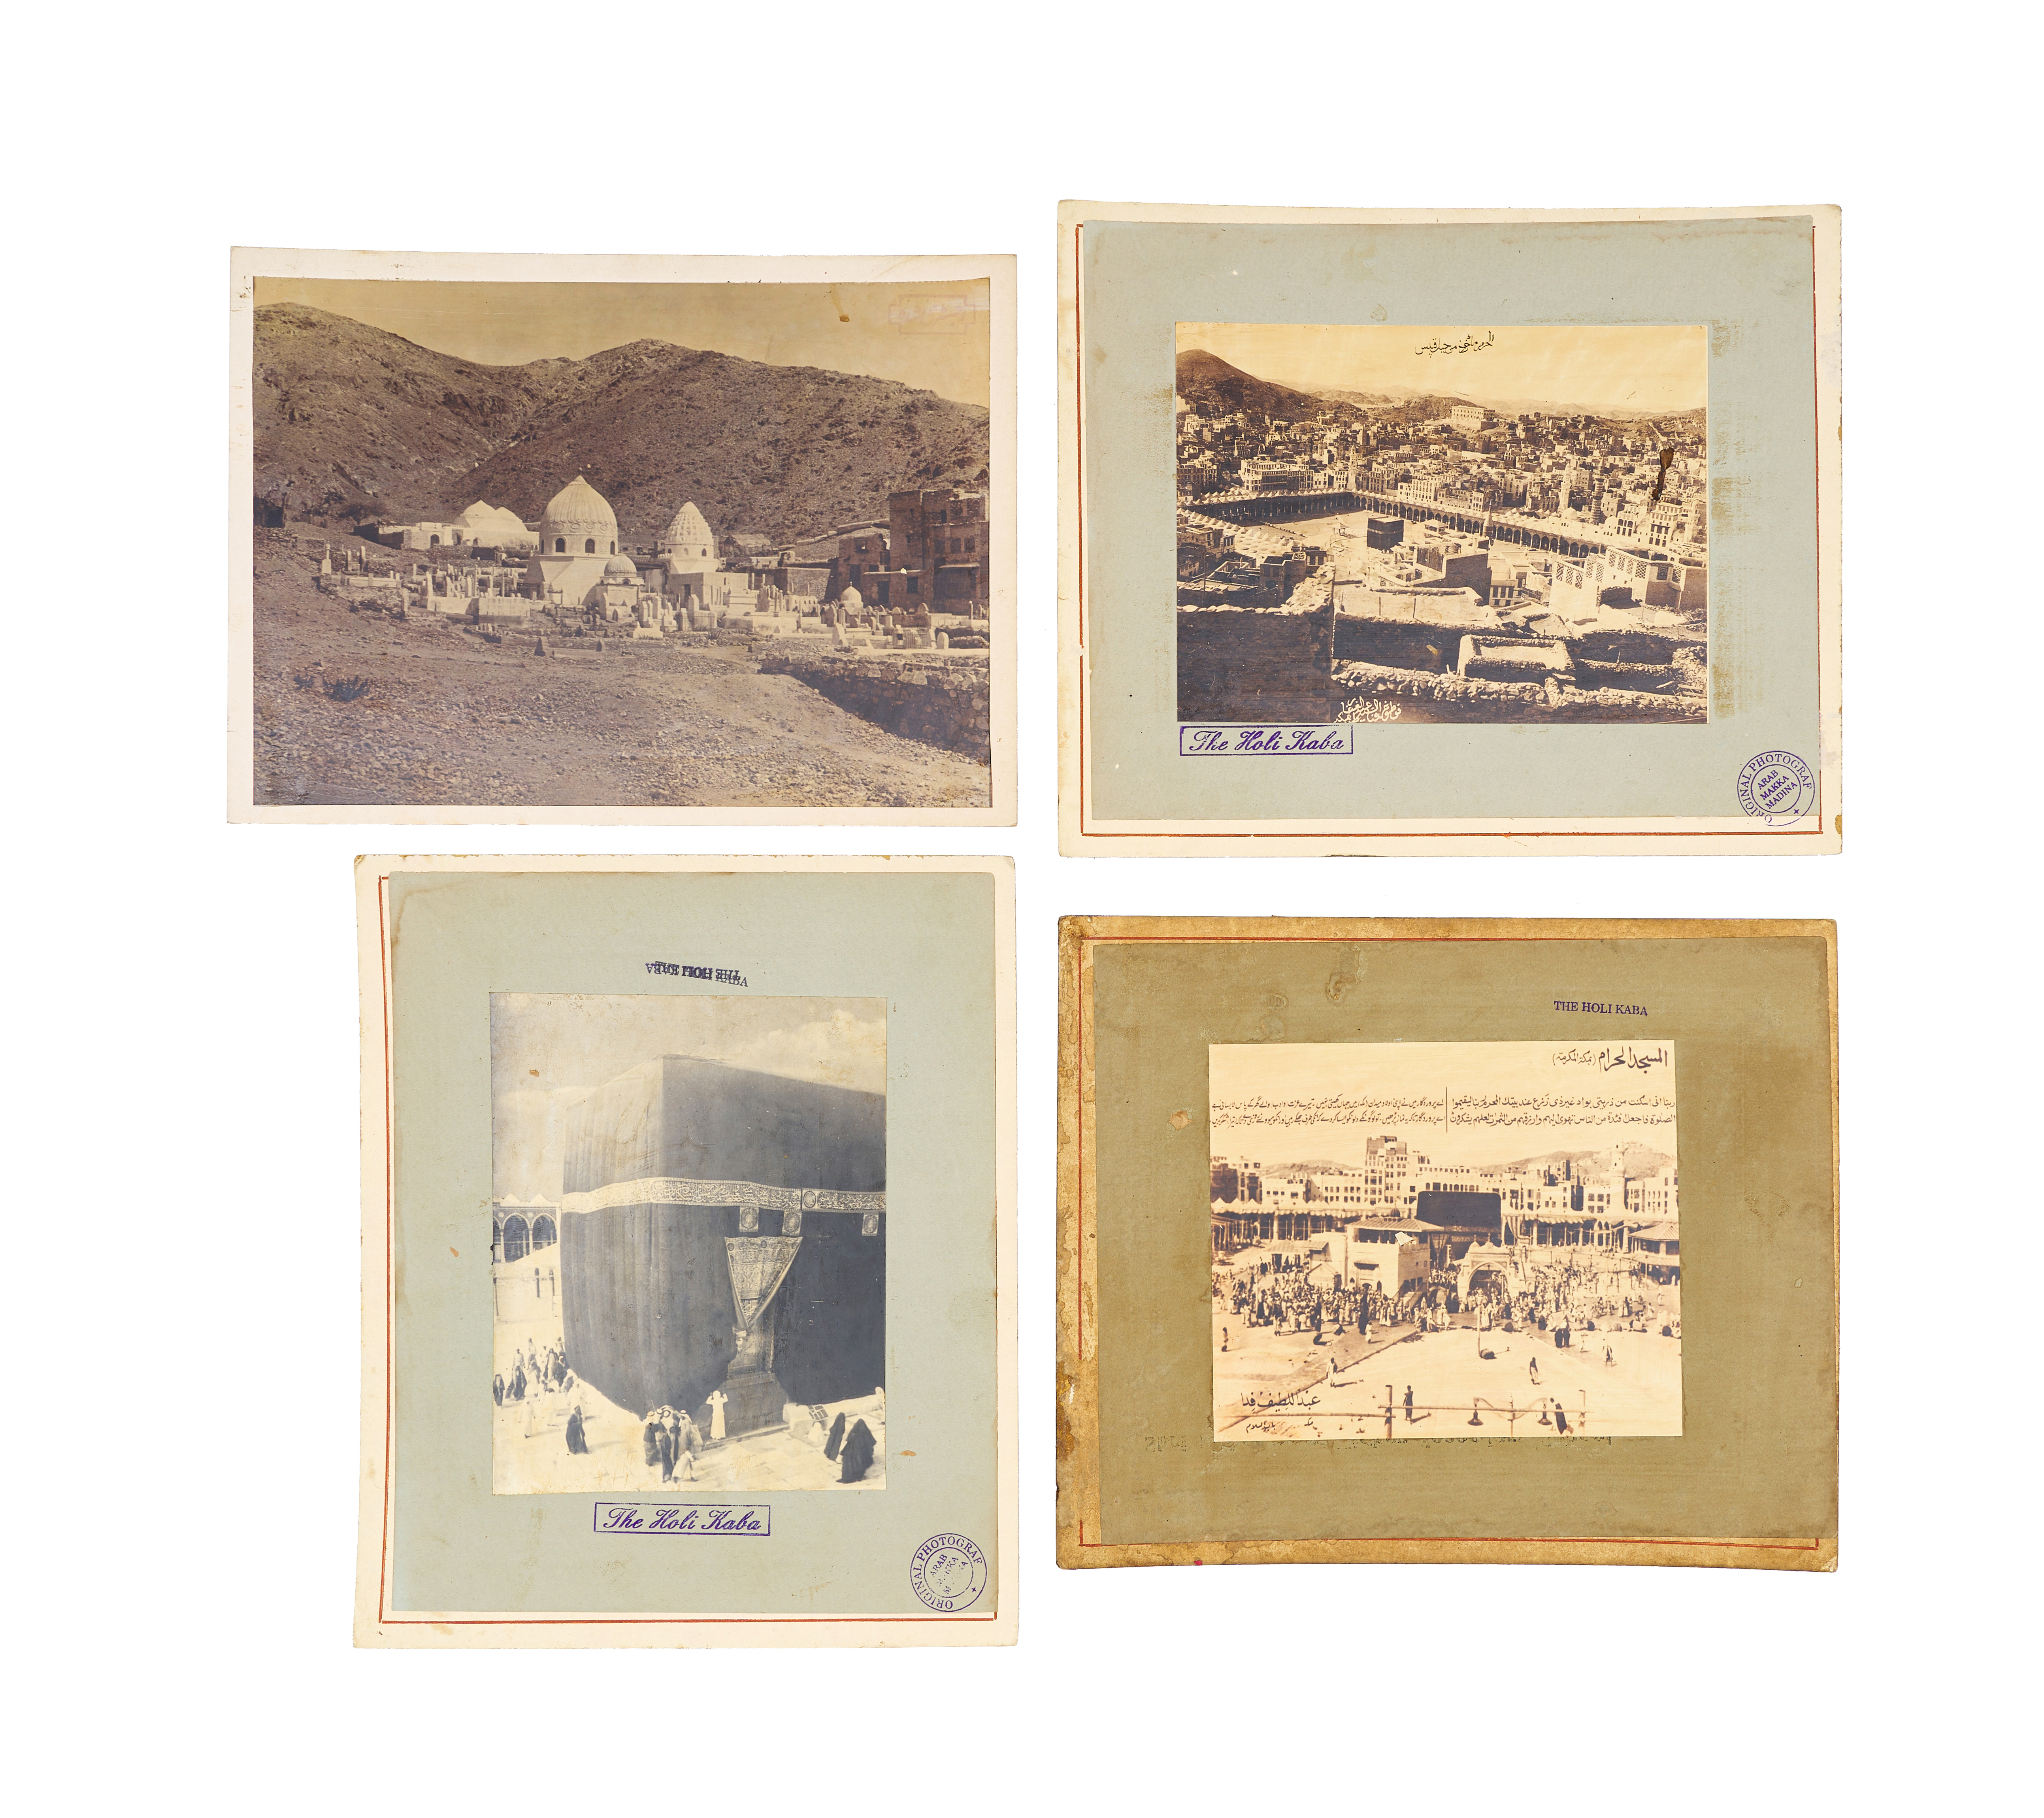 THREE PHOTOS OF THE HOLY KAABA, MECCA, AND ONE OF A HOLY SITE, SAUDI ARABIA, 20TH CENTURY